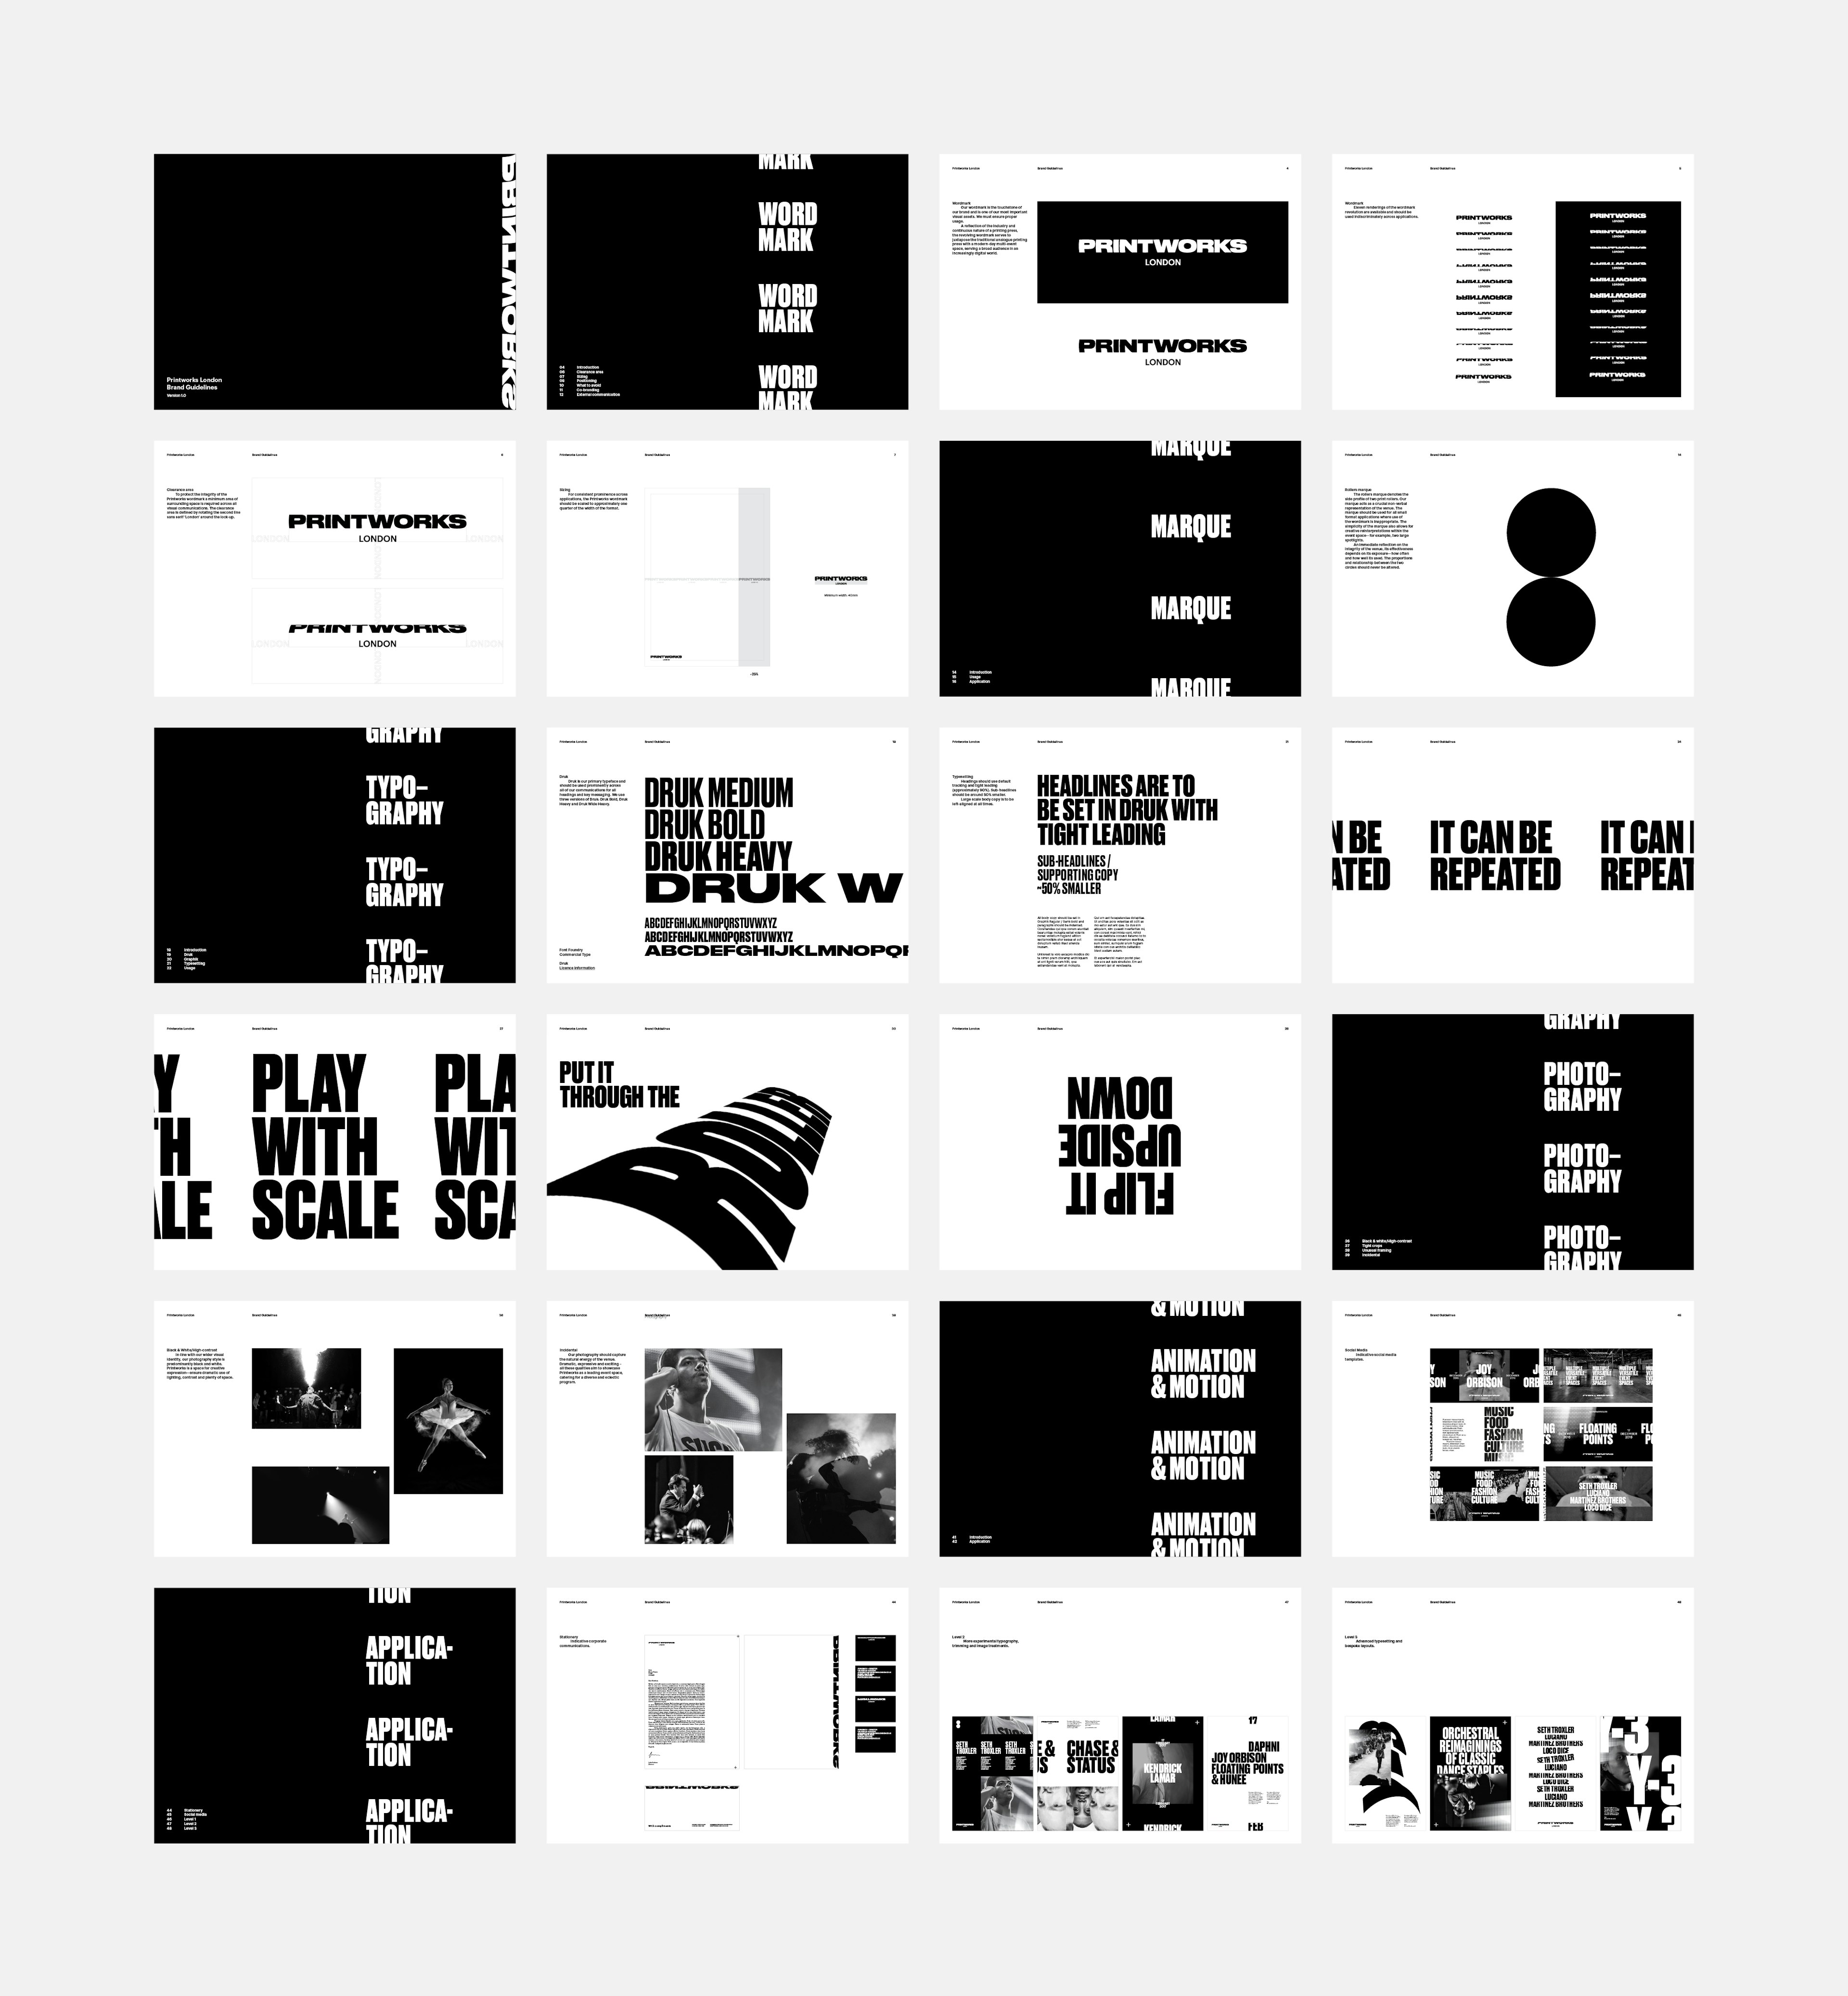 Brand guidelines for Printworks London